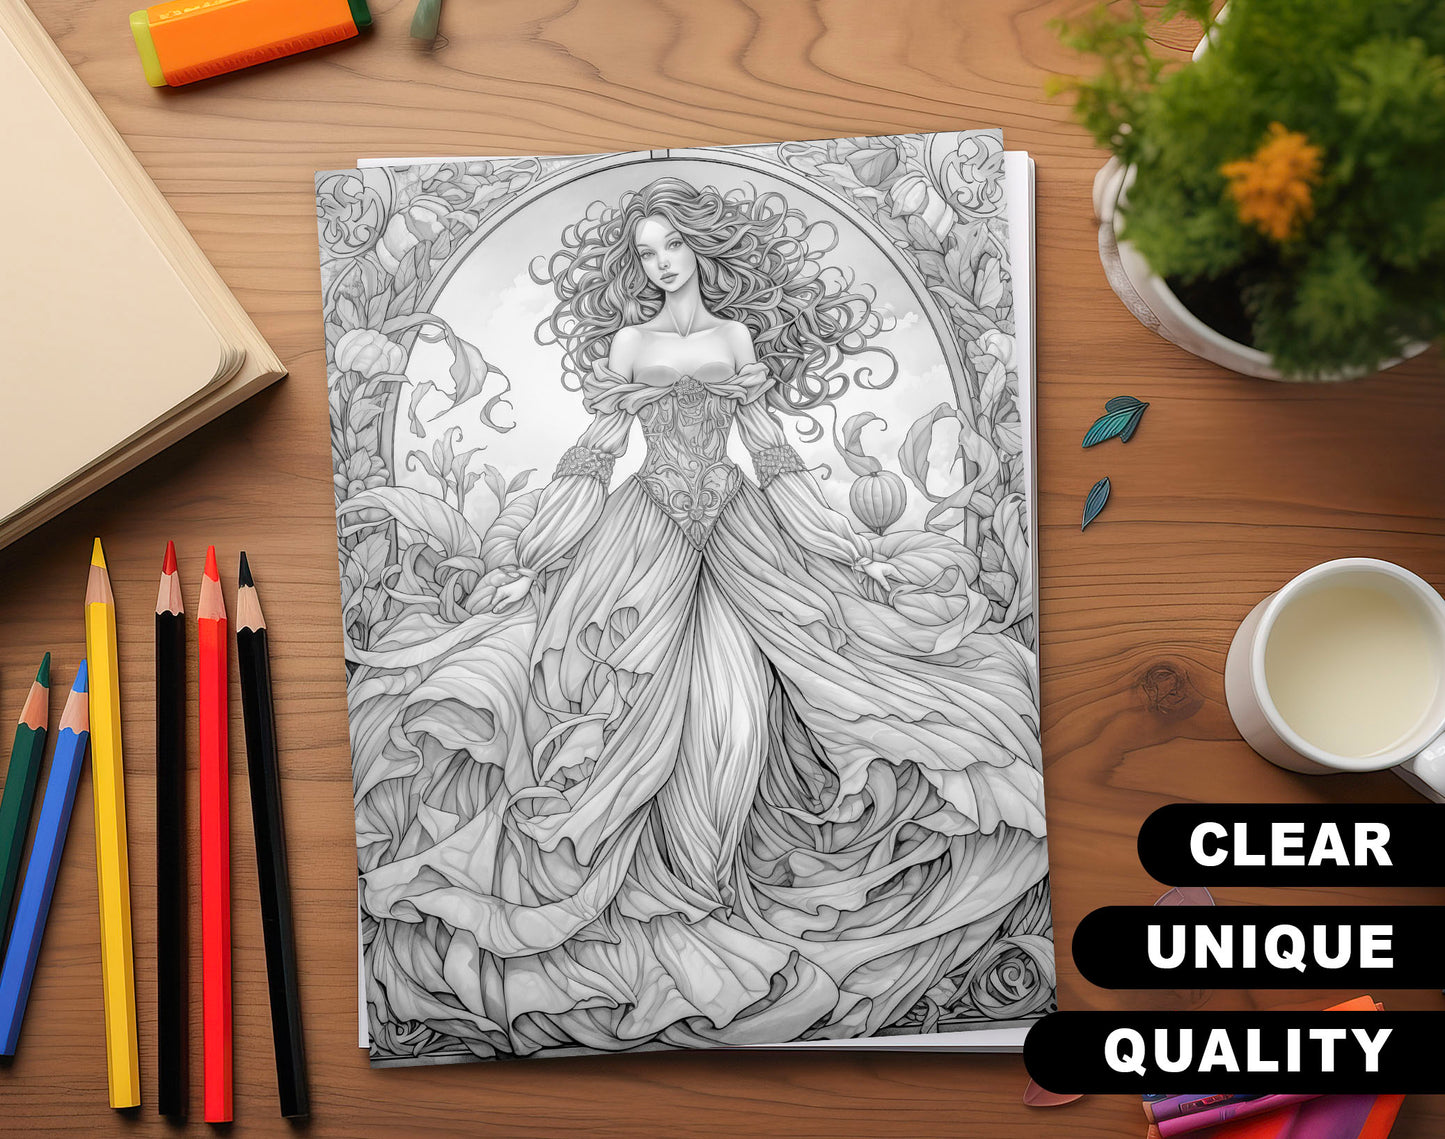 50 Autumn Princesses Grayscale Coloring Pages - Instant Download - Printable PDF Dark/Light